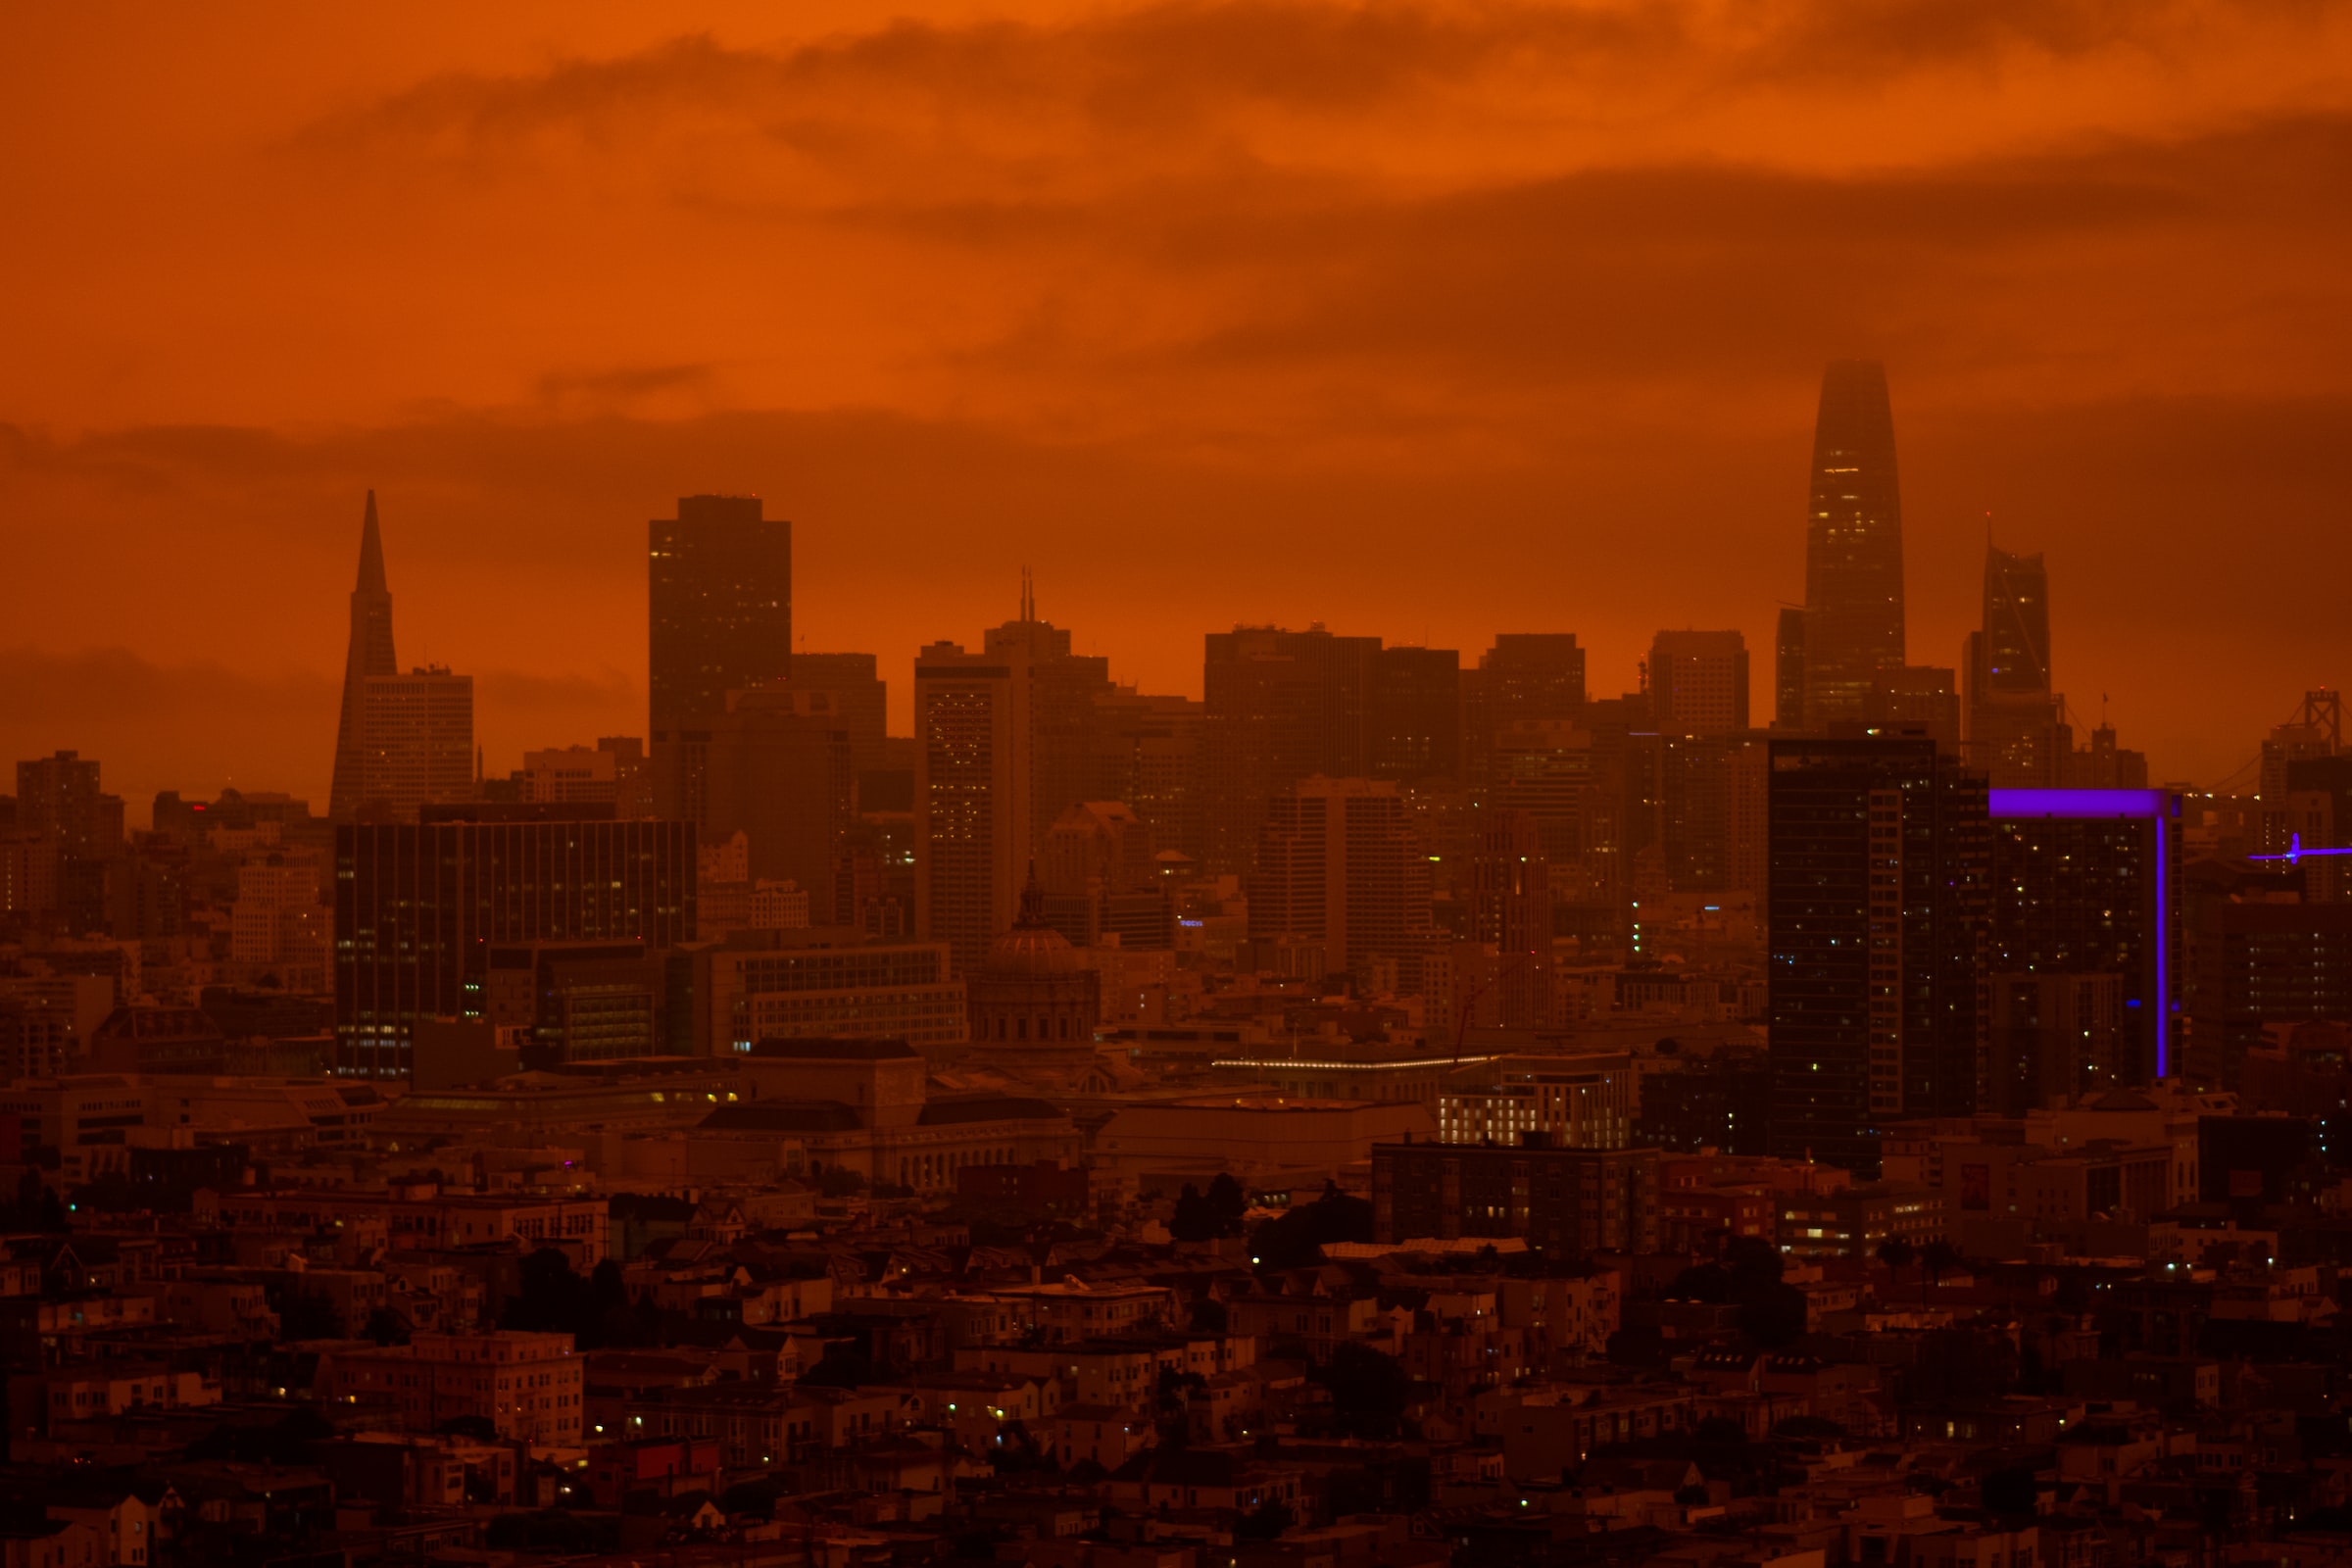 A city skyline is obscured by a thick red haze